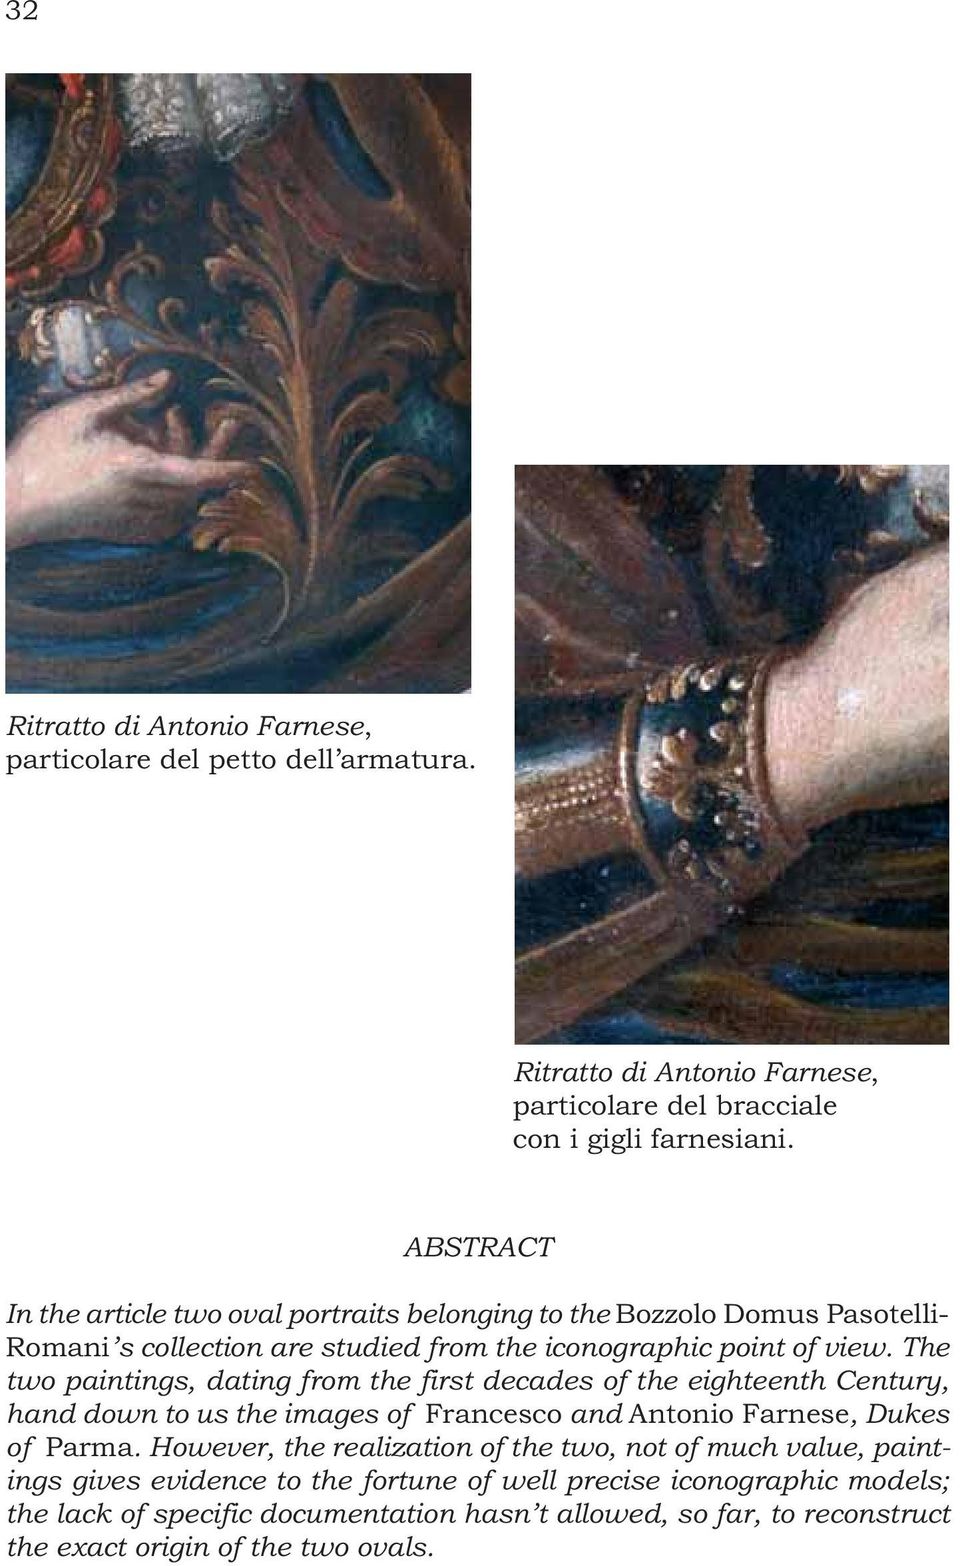 The two paintings, dating from the first decades of the eighteenth Century, hand down to us the images of Francesco and Antonio Farnese, Dukes of Parma.